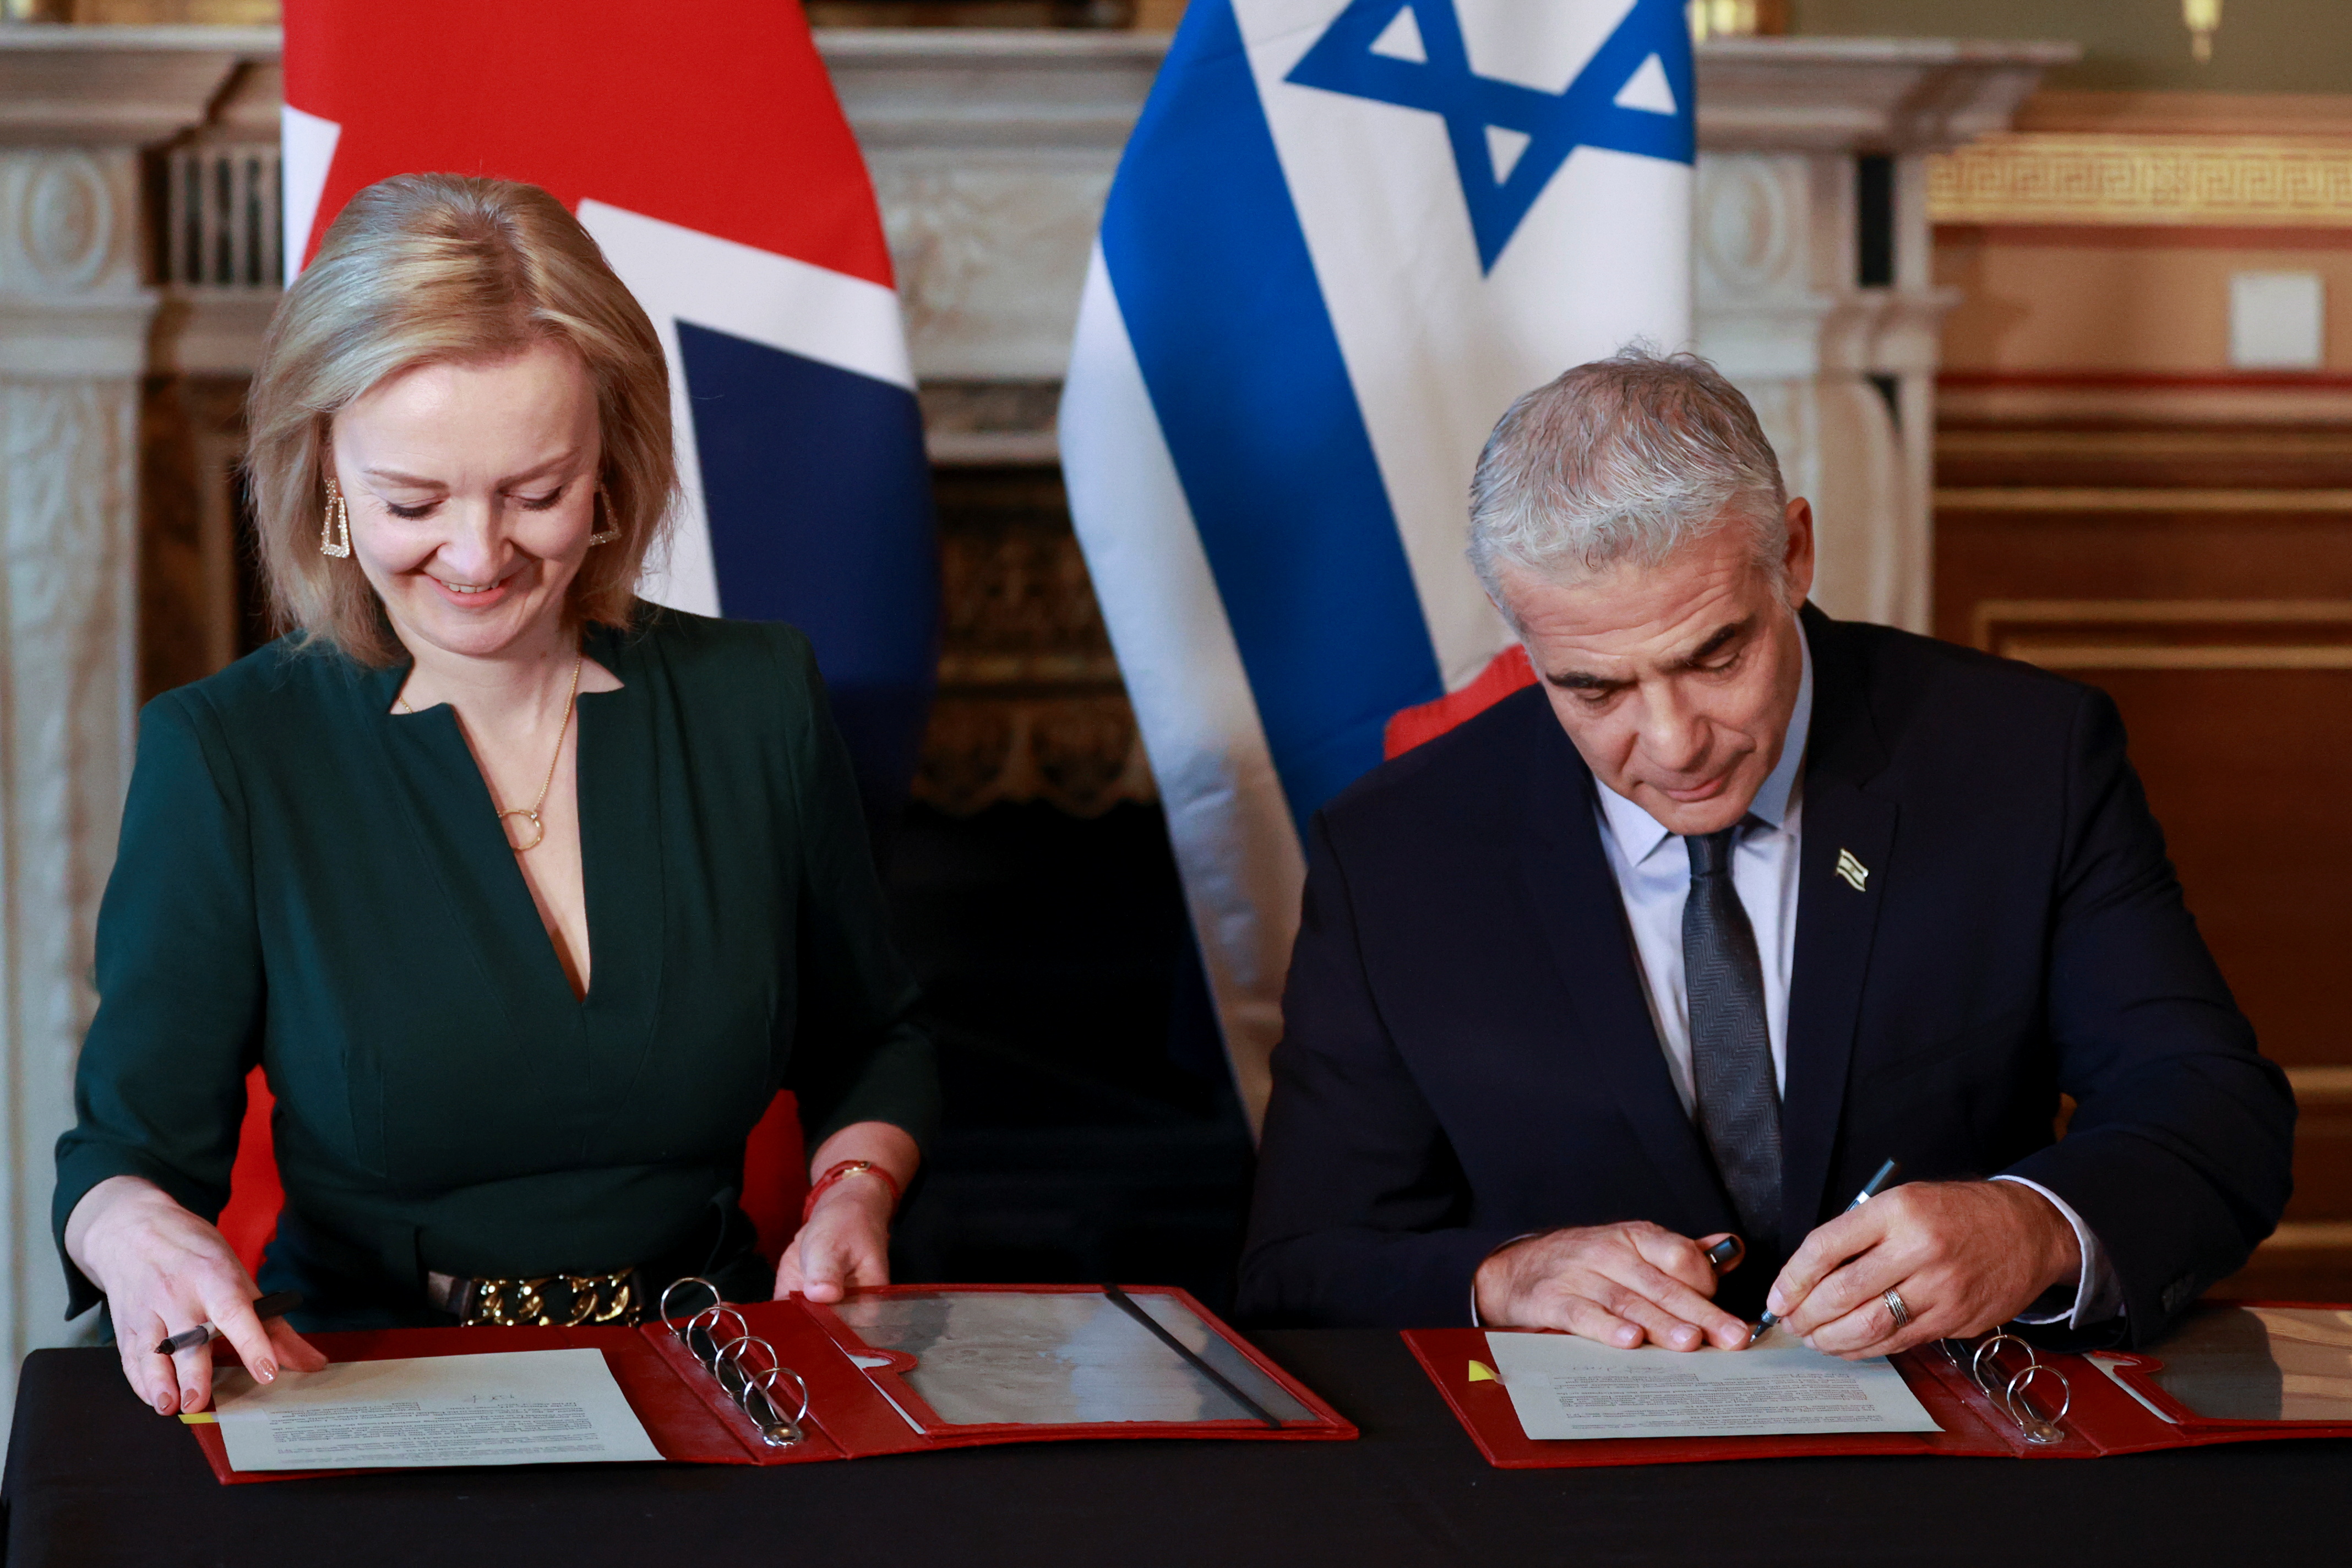 Britain's Foreign Secretary Liz Truss and Israeli Foreign Minister Yair Lapid sign a memorandum of understanding at Britain's Foreign Commonwealth & Development Office in London, Britain, November 29, 2021. REUTERS/Hannah McKay